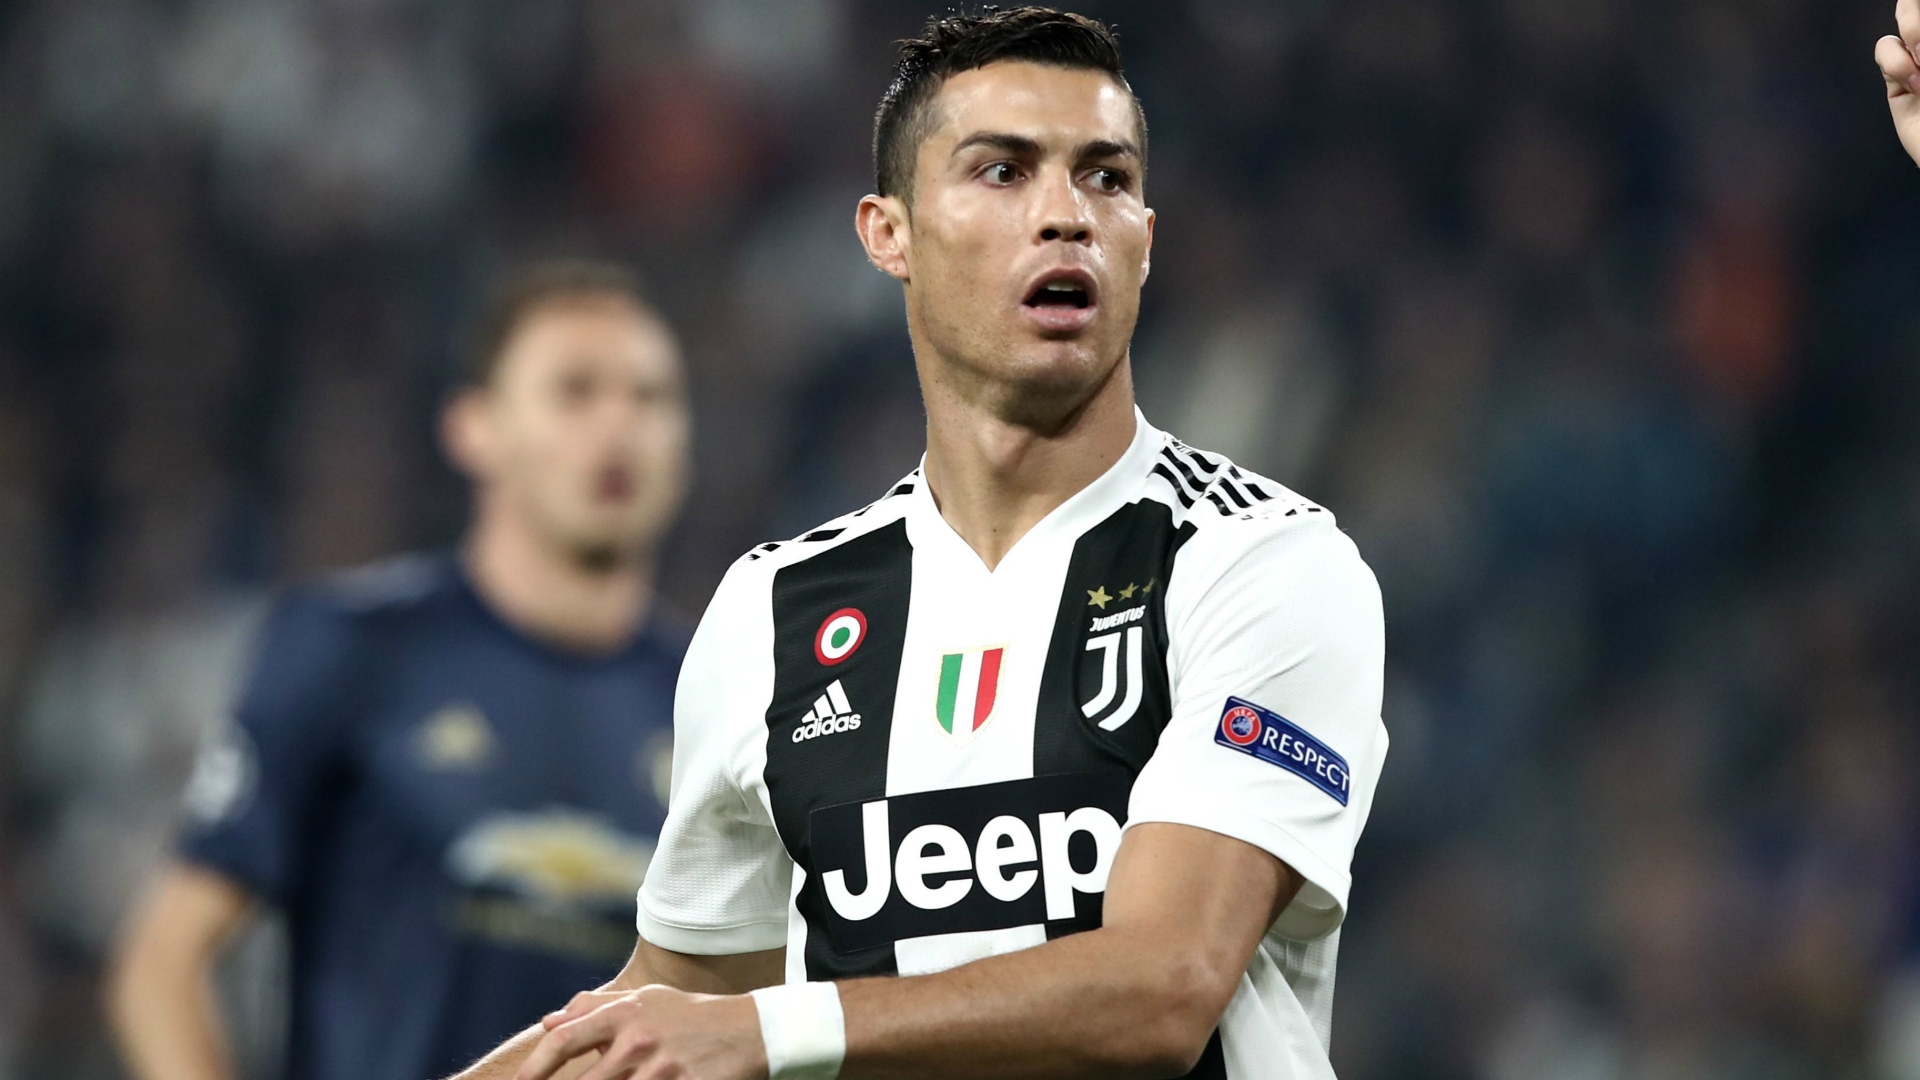 Serie A News How Do You Sell Cristiano Ronaldo For 100m Andre Villas Boas Lauds Juventus As He Considers Role In Italy Goal Com